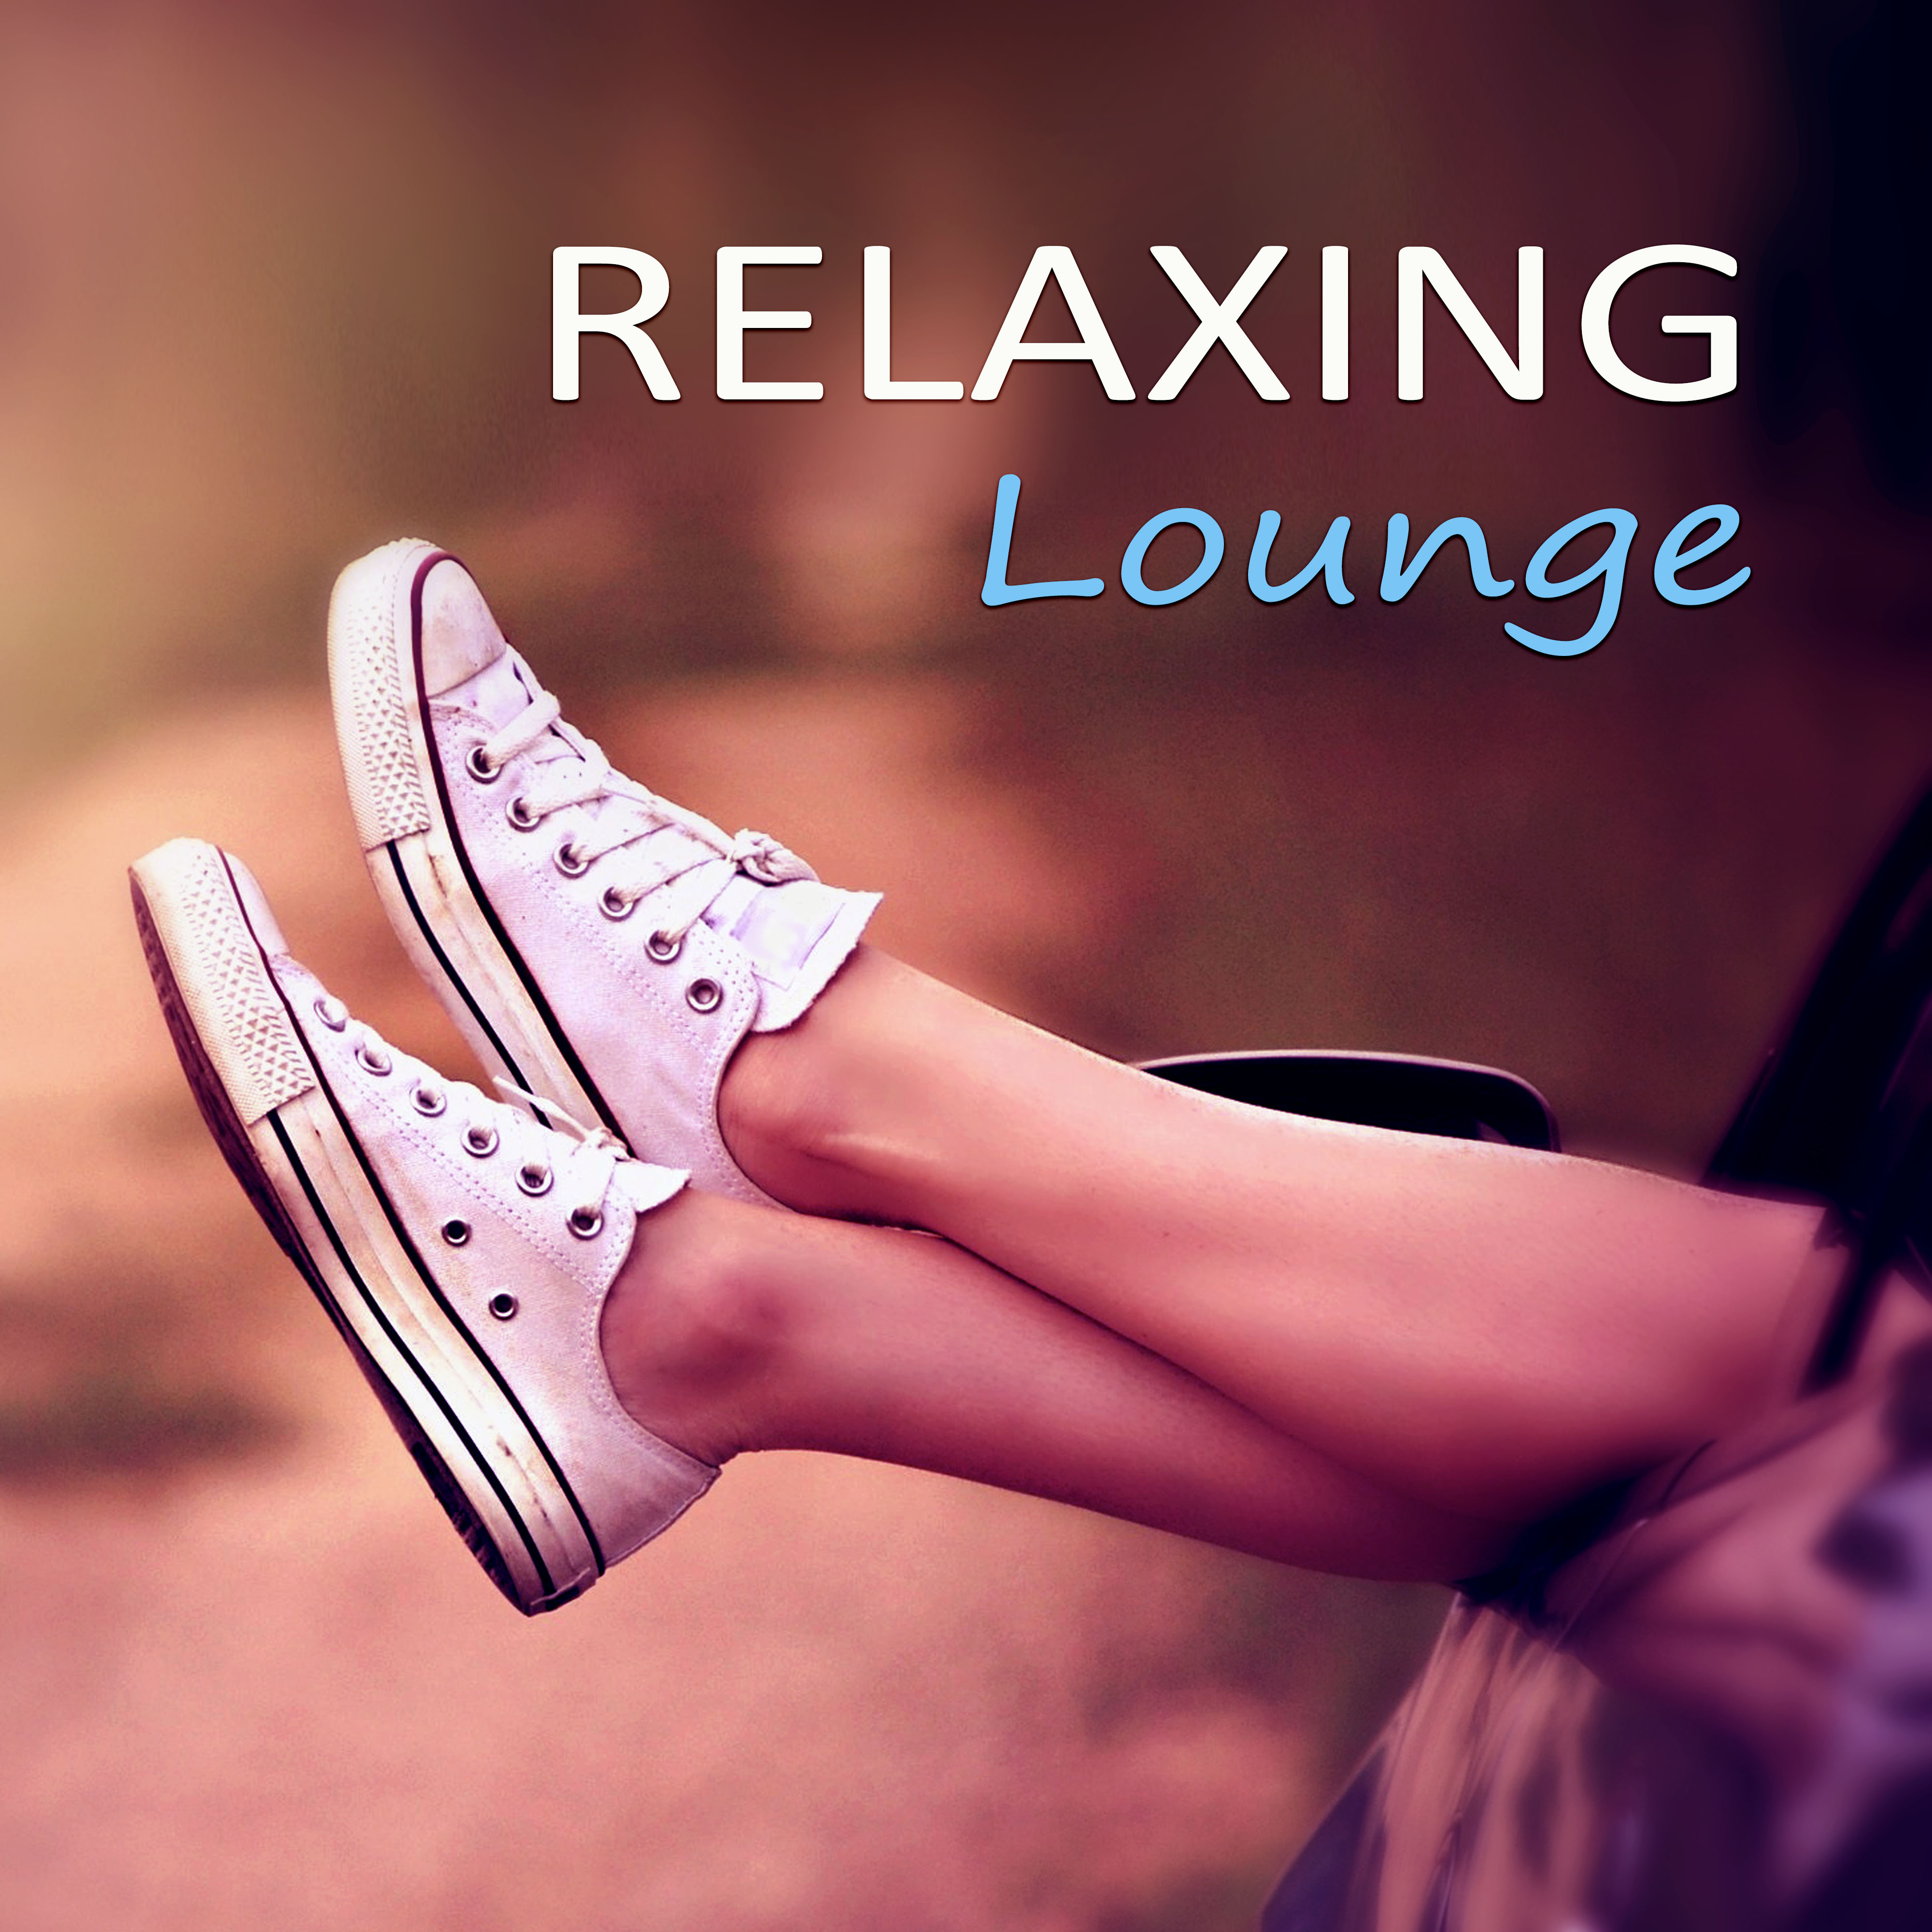 Relaxing Lounge  Relaxation, Spa Lounge, Soothing Sounds, Nature Sounds, Therapy Massage Music